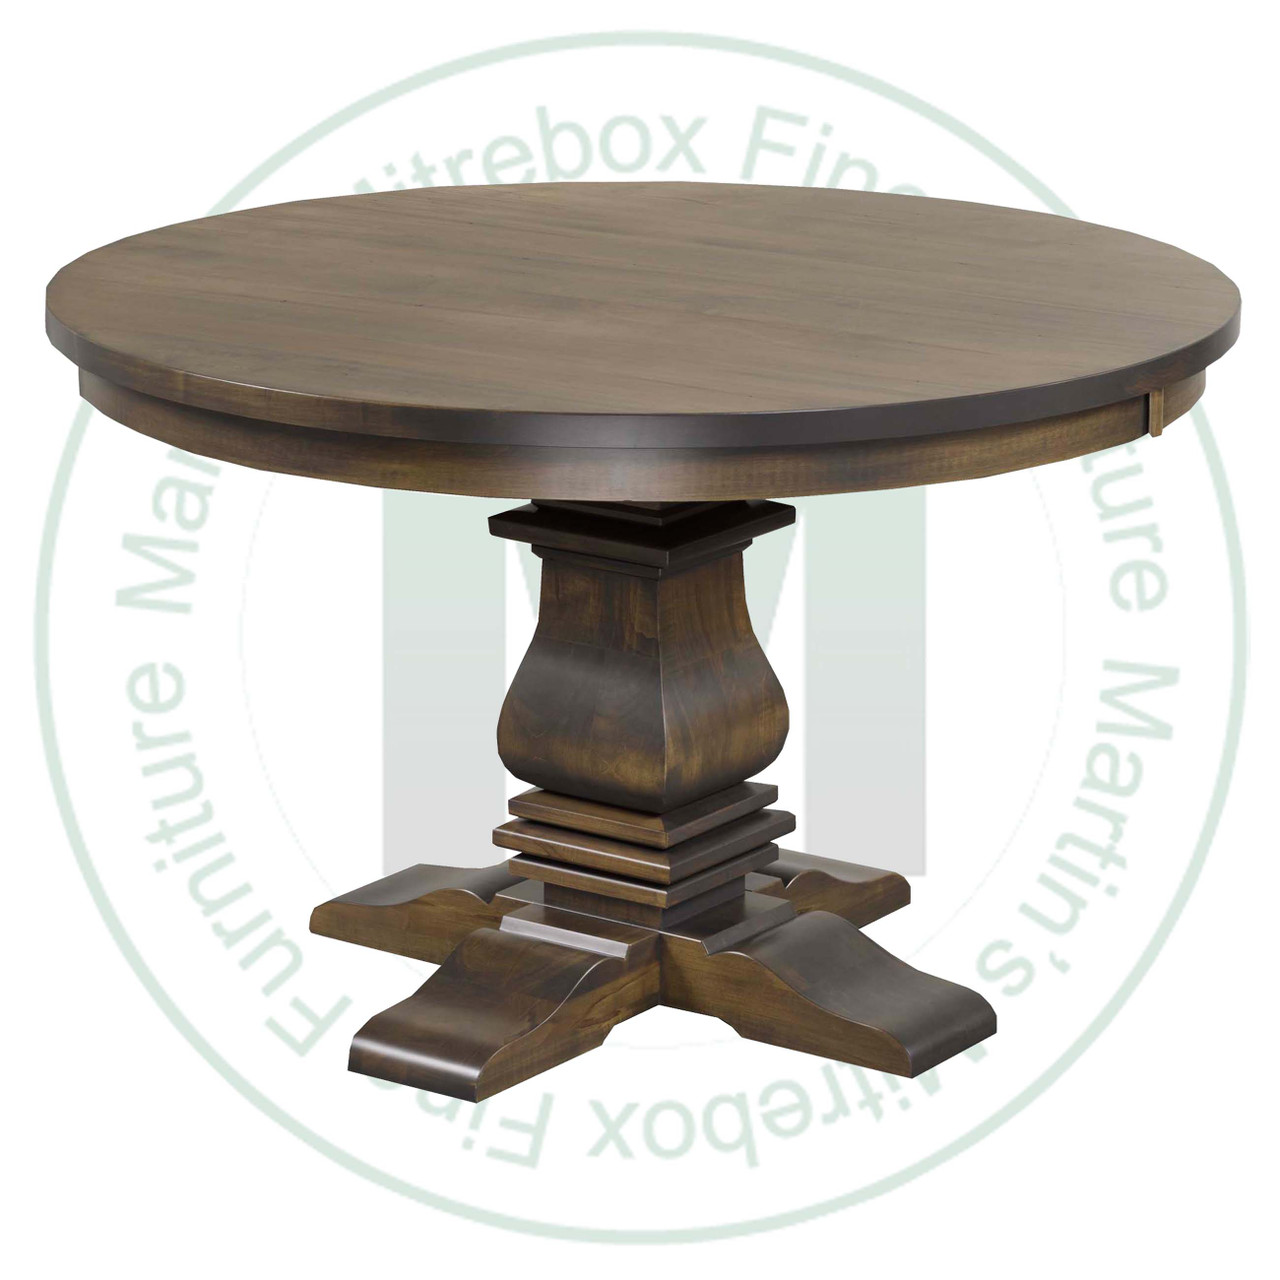 Maple Spartan Collection Single Pedestal Table 42''D x 42''W x 30''H With 2 - 12'' Leaves. Table Has 1.25'' Thick Top